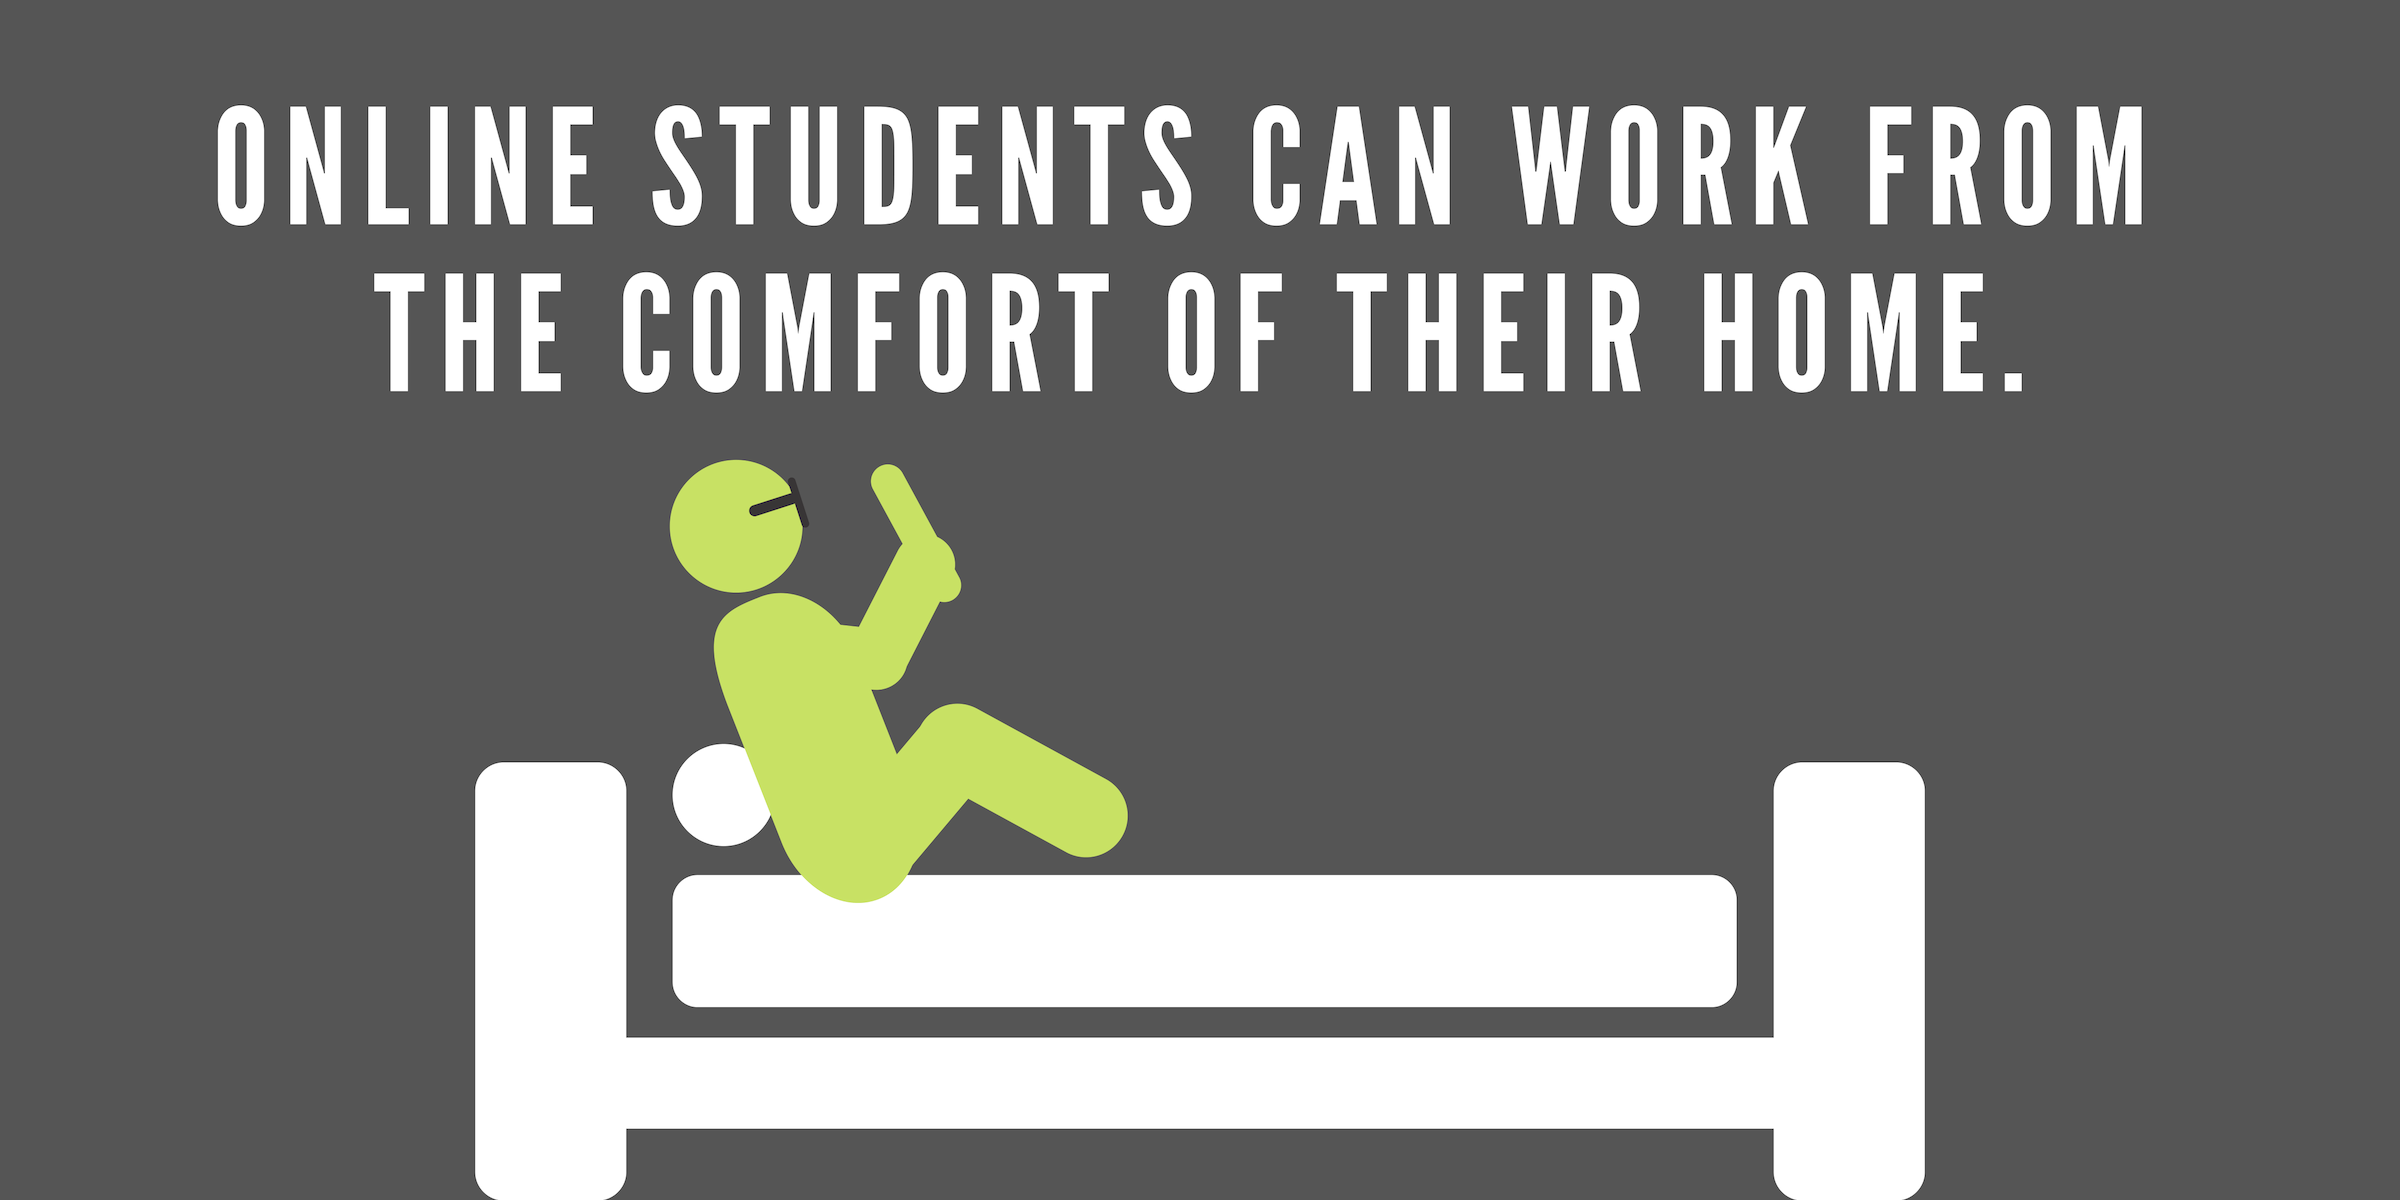 Online students can work from the comfort of their home.